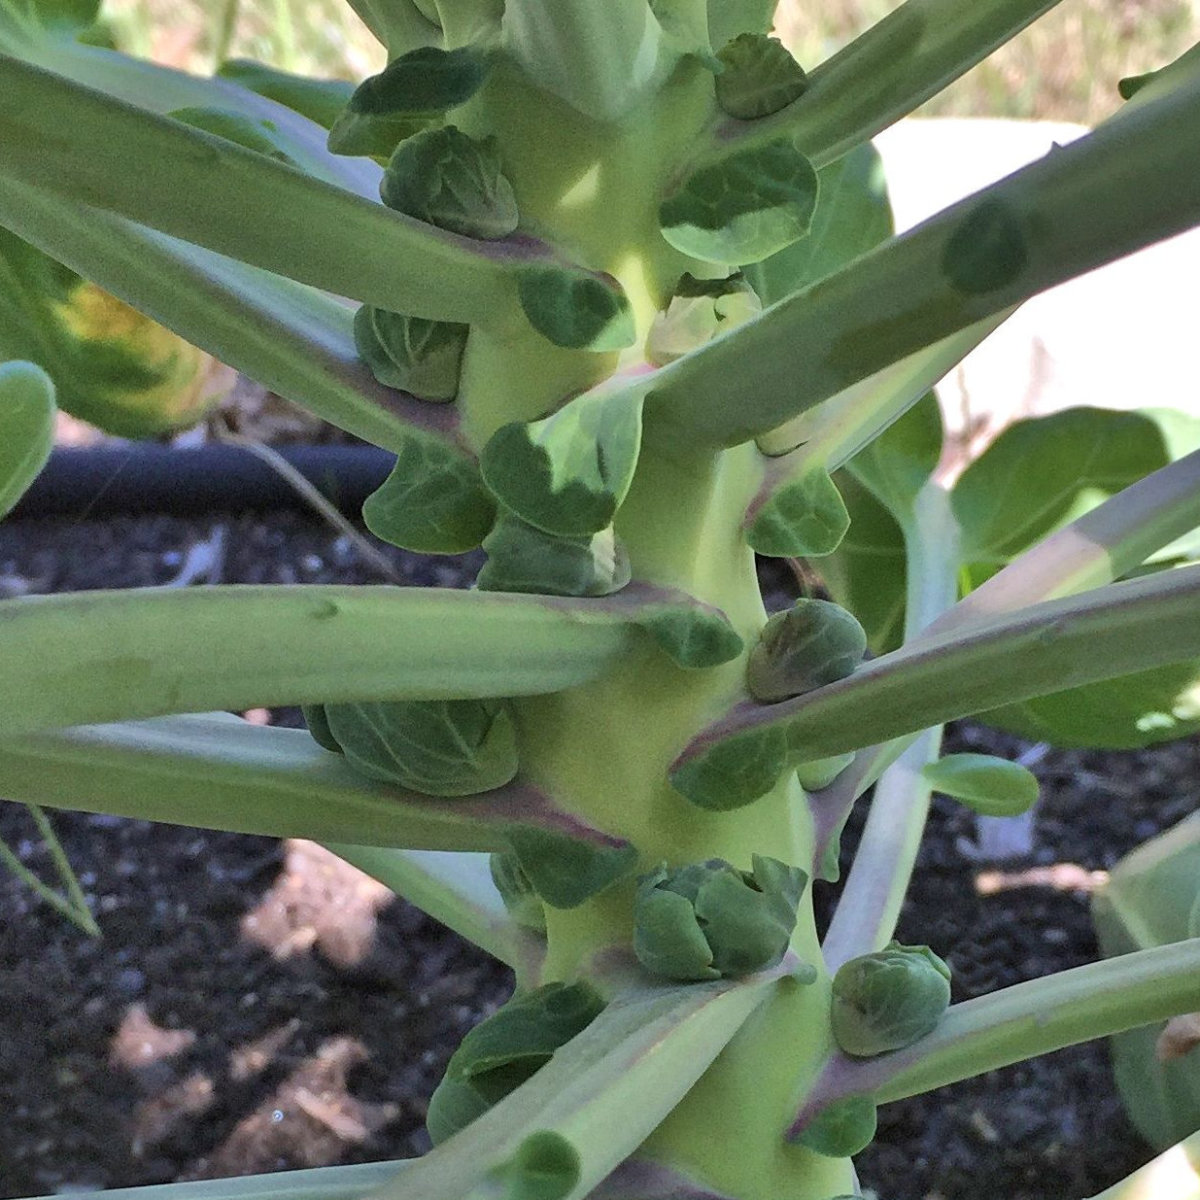 Baby Brussels sprouts growing in our little garden